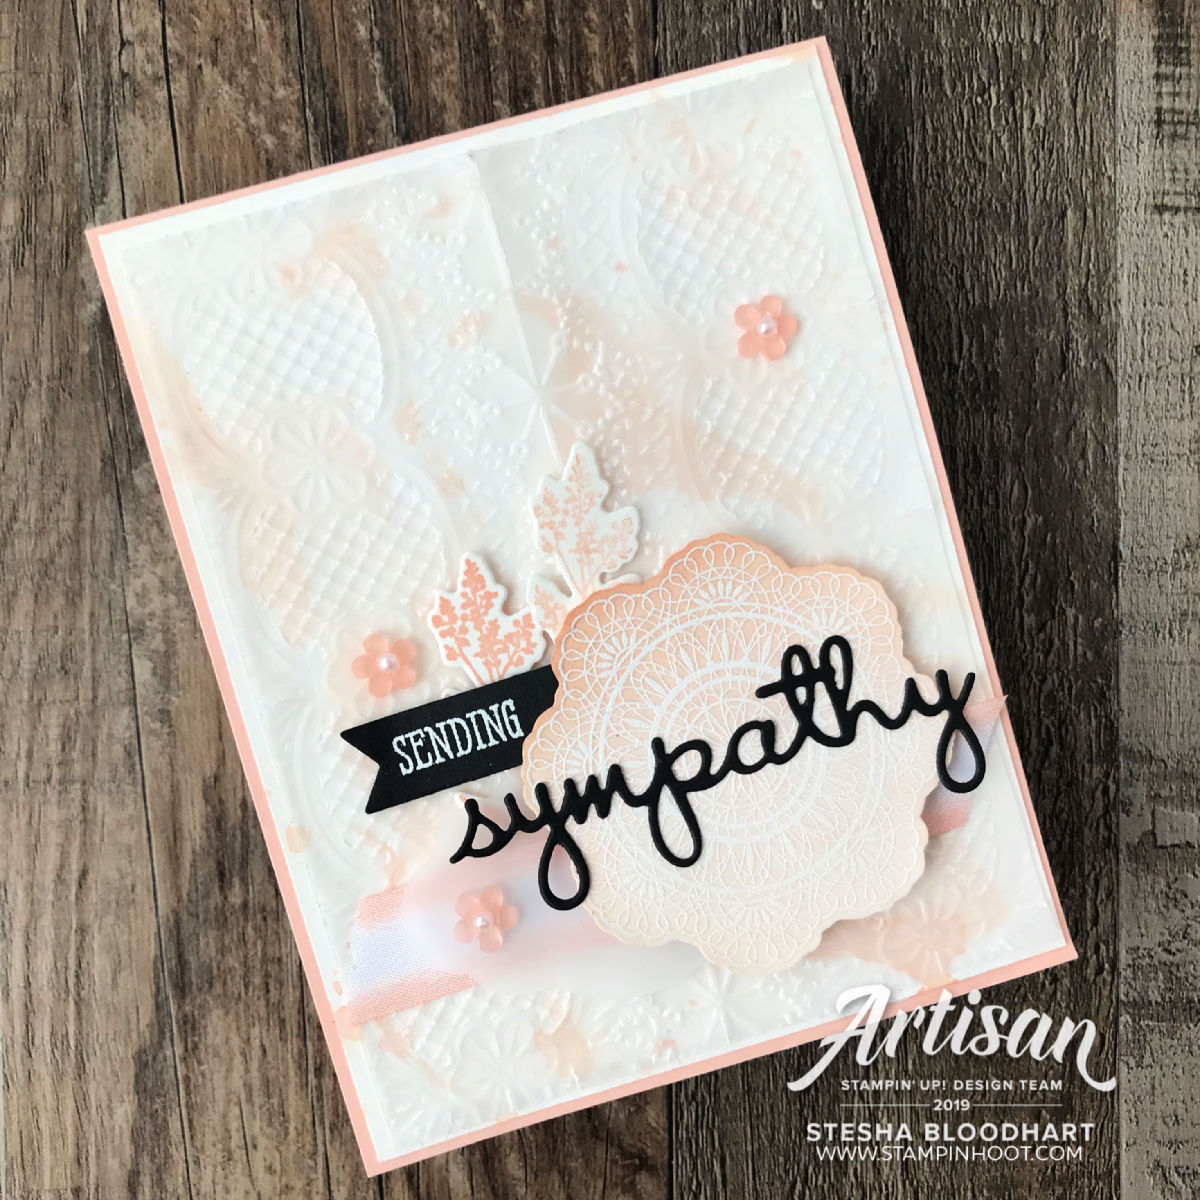 Dear Doily and Well Said Bundles by Stampin' Up! 2019 Artisan Design Team Created by member Stesha Bloodhart Stampin' Hoot! 